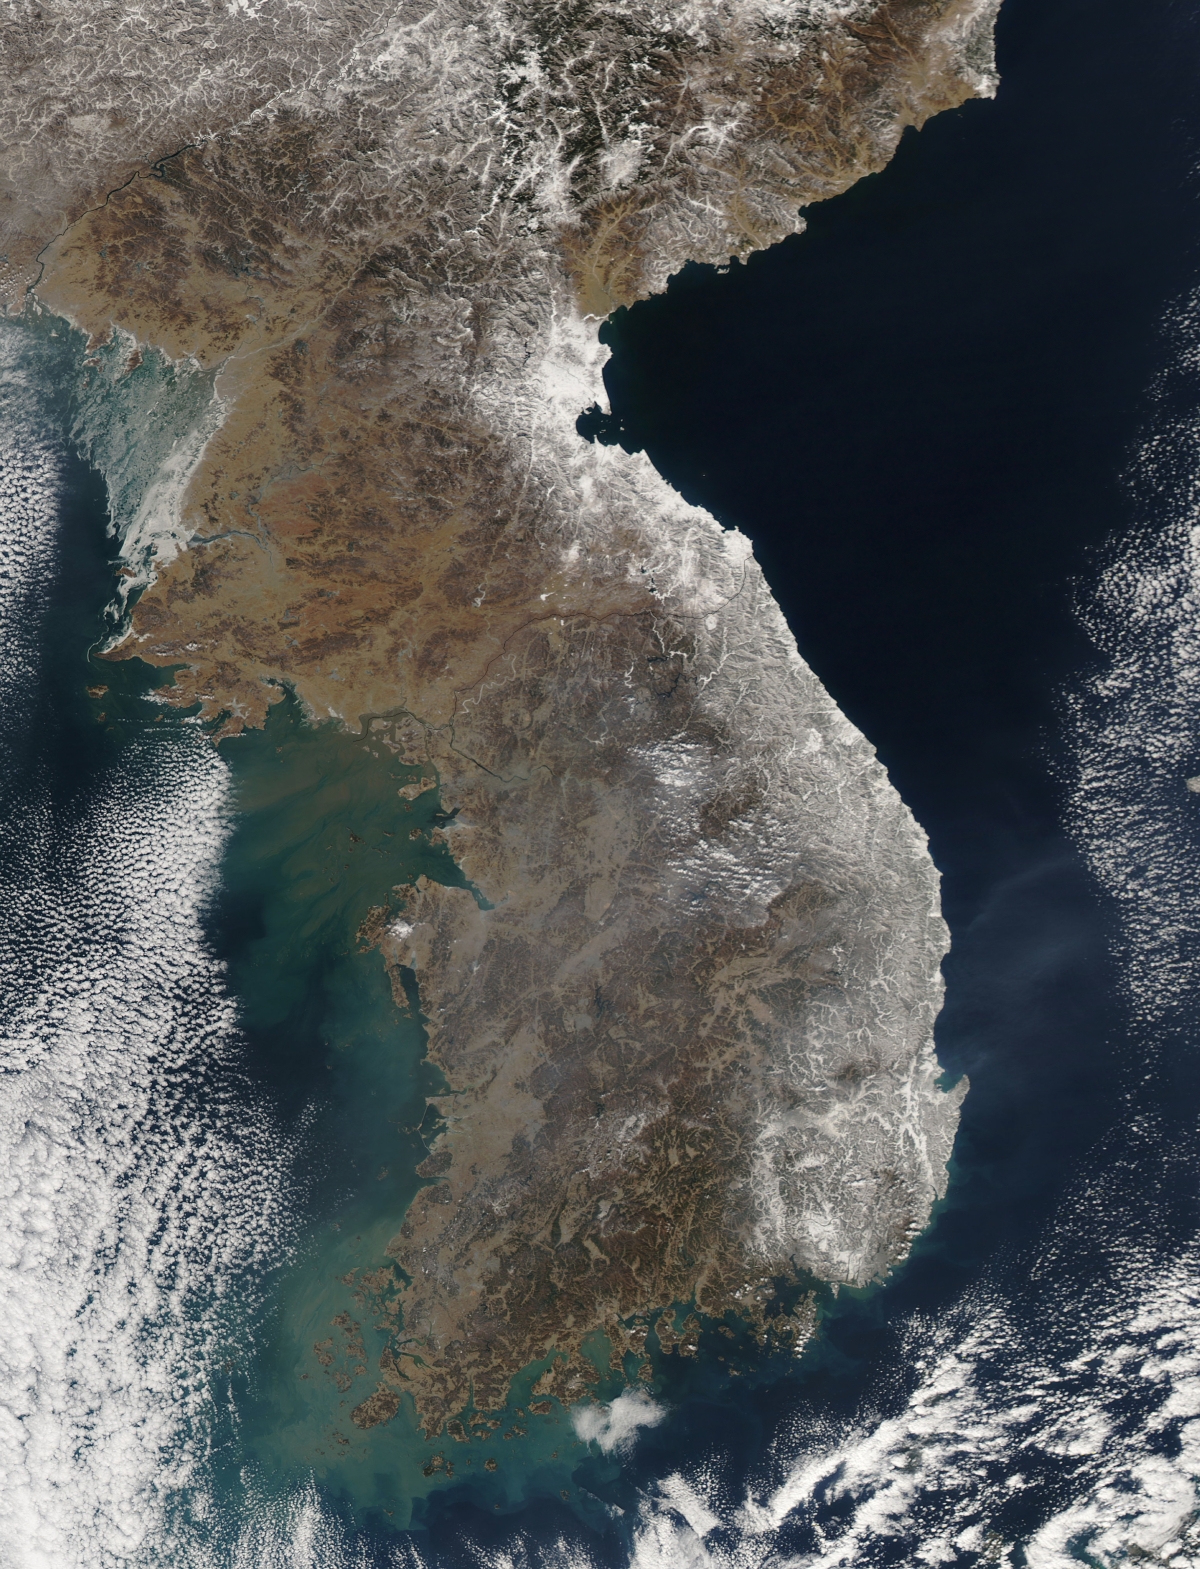 February 15, 2011 09/14/2009 Satellite view of snowfall along South Korea's east coast. East of Seoul, clusters of small white clouds cast shadows onto the surface below, but most of the white on the peninsula is snow.